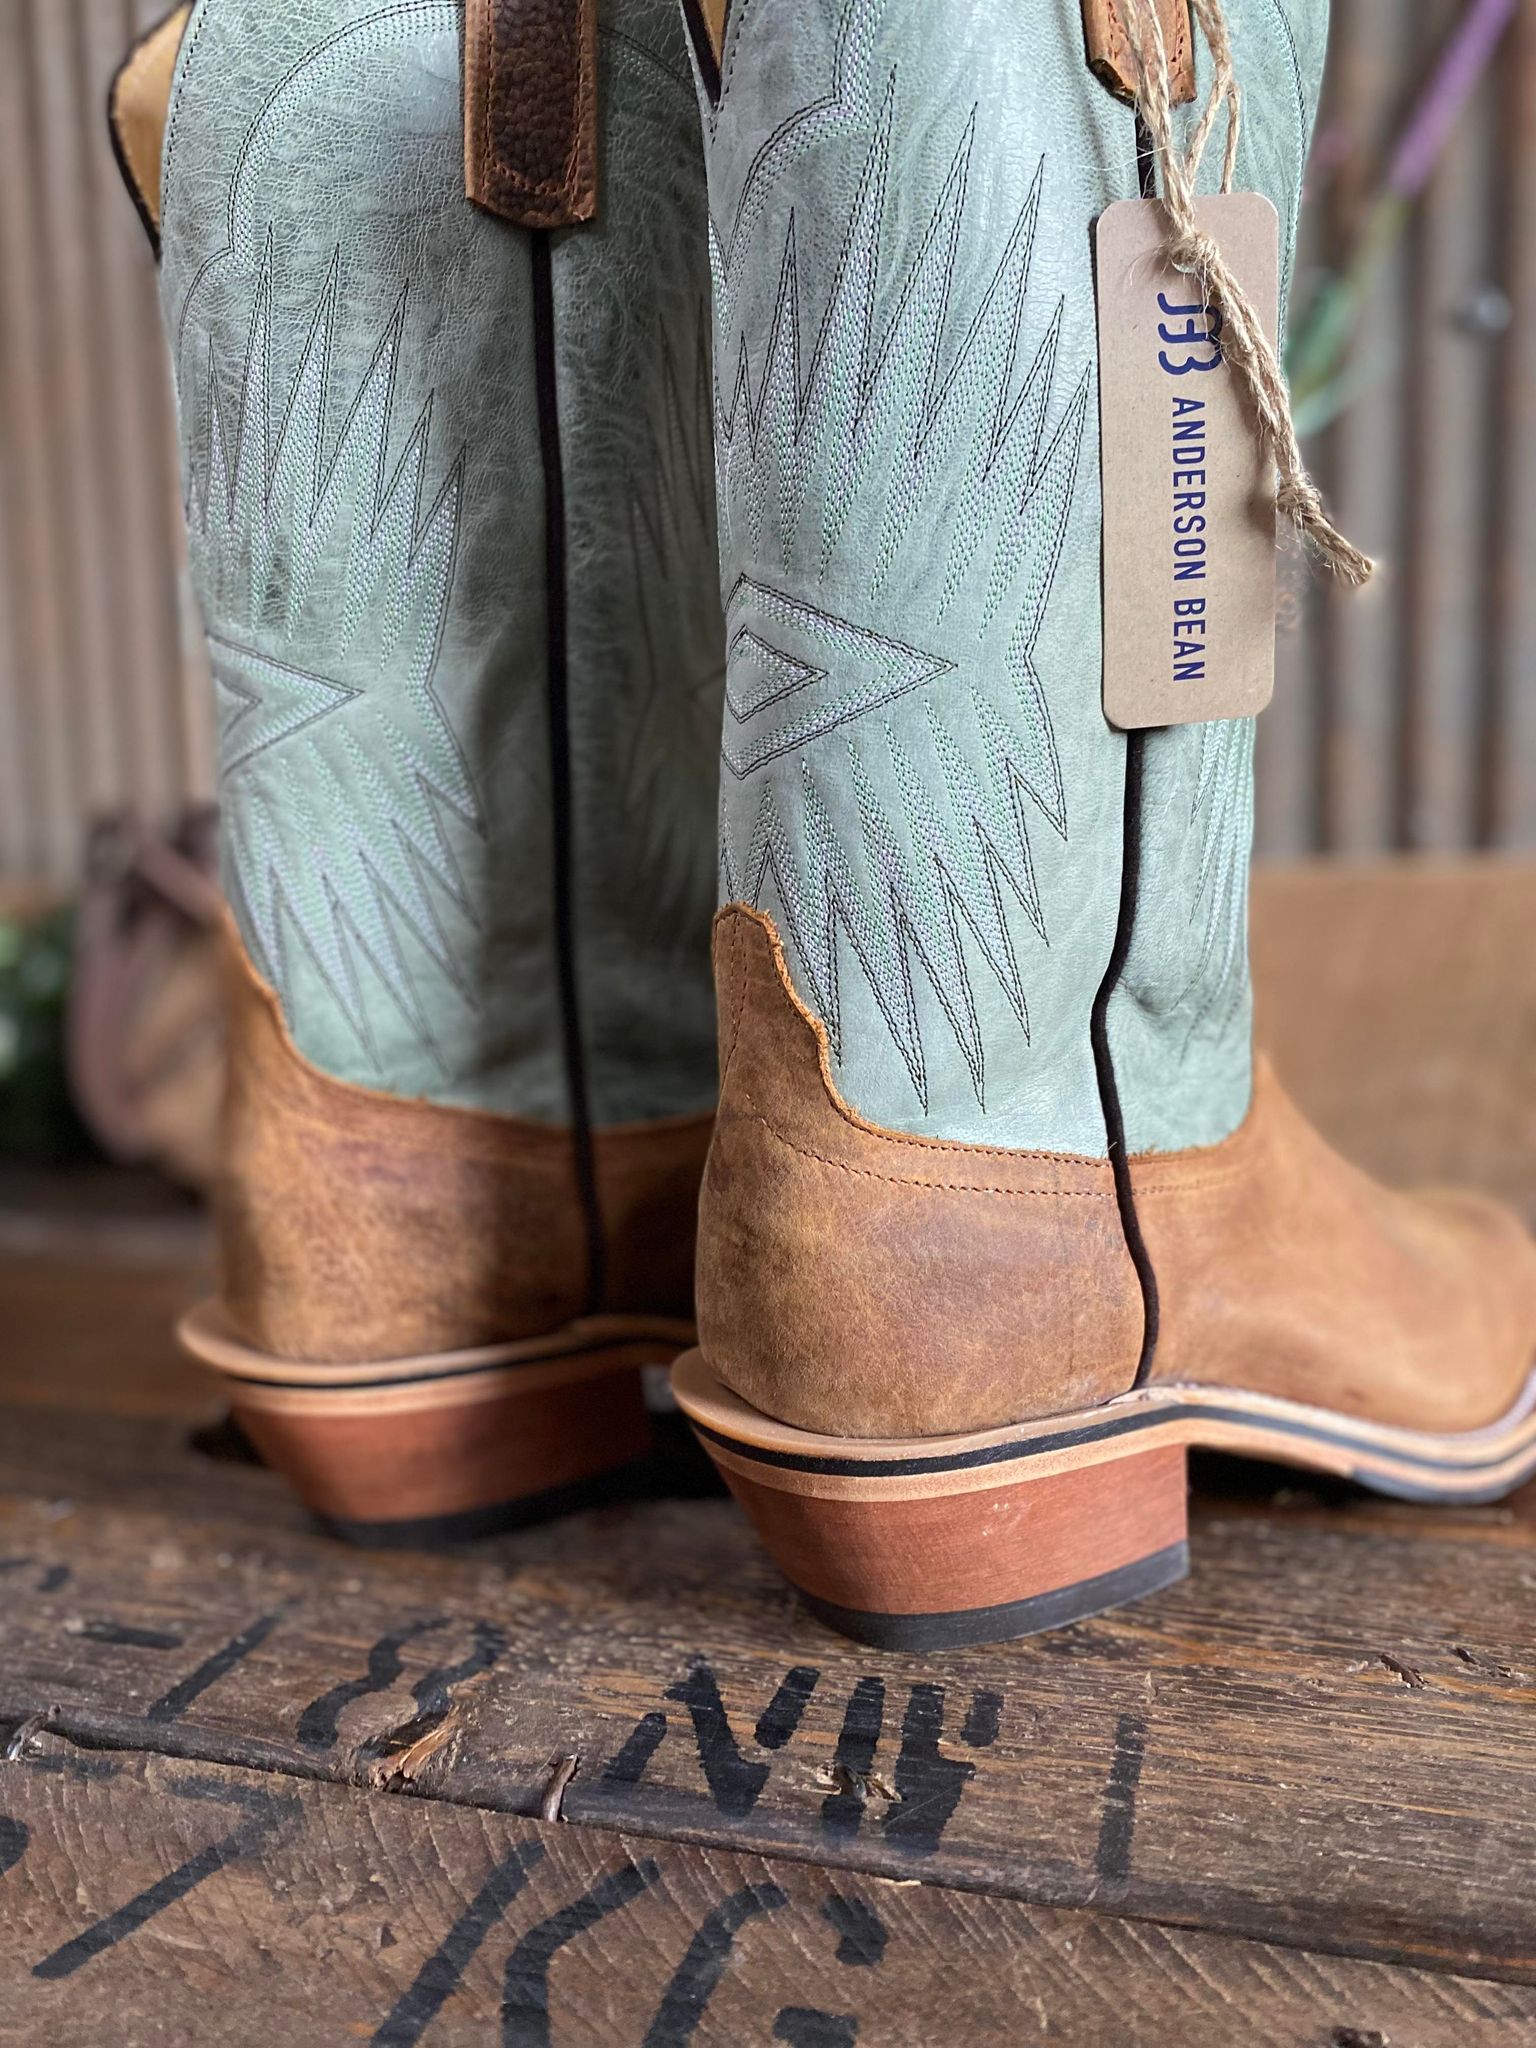 Men's Anderson Bean Dune Rough Rider-Men's Boots-Anderson Bean-Lucky J Boots & More, Women's, Men's, & Kids Western Store Located in Carthage, MO